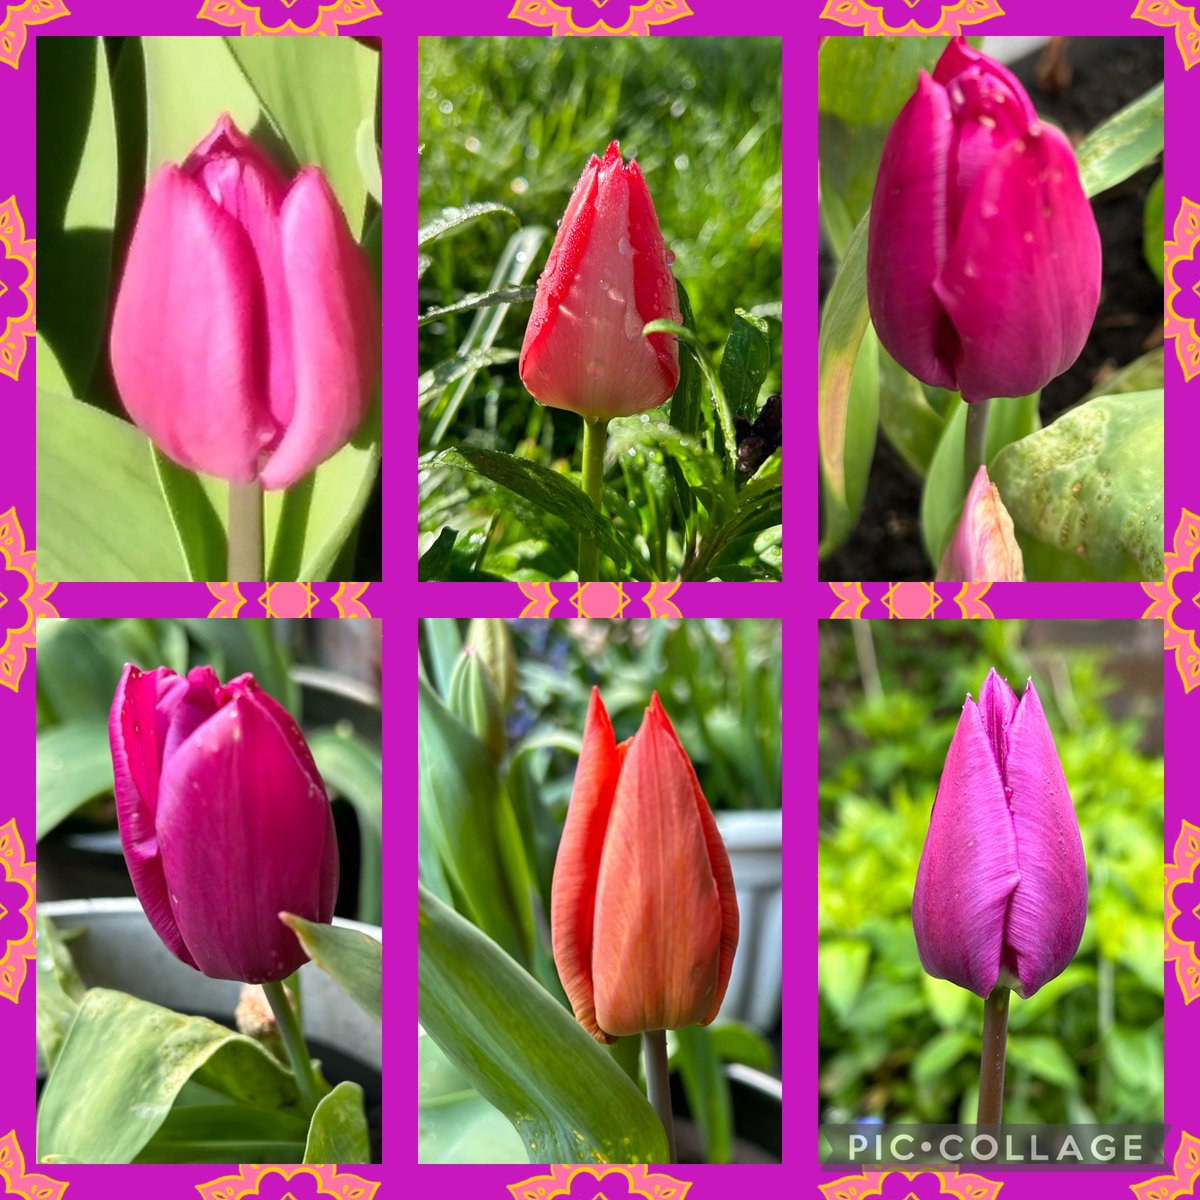 Tulips in my garden on a brighter warmer day, is it the calm before the storm? Happy Saturday all. #SixonSaturday #GardeningTwitter